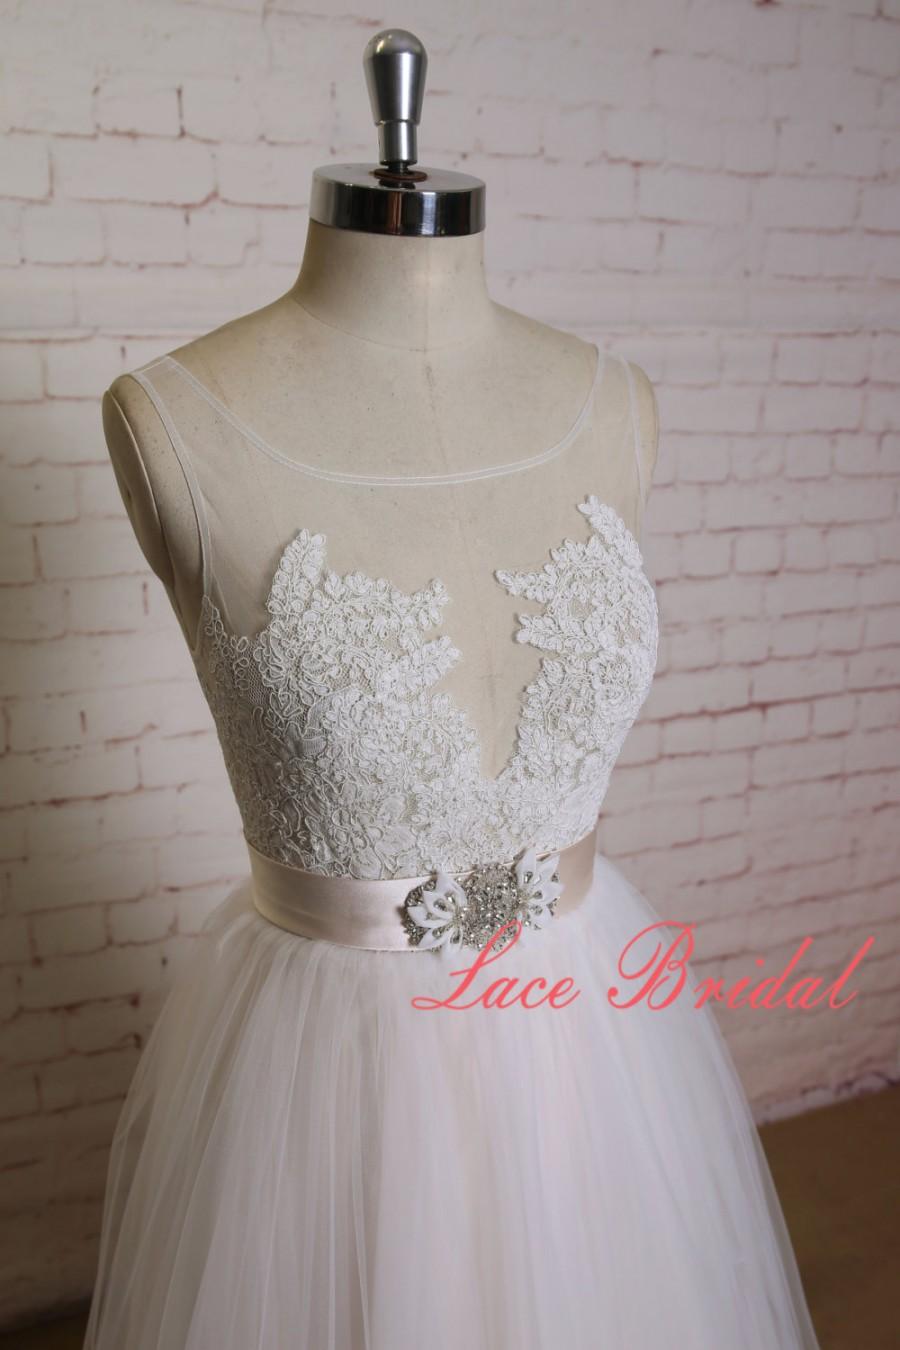 Wedding - Sheer Lace Bodice Wedding Dress with Illusion Neckline Tulle Skirt Bridal Gown with Nude Beading Belt A-line Wedding Dress with V Back